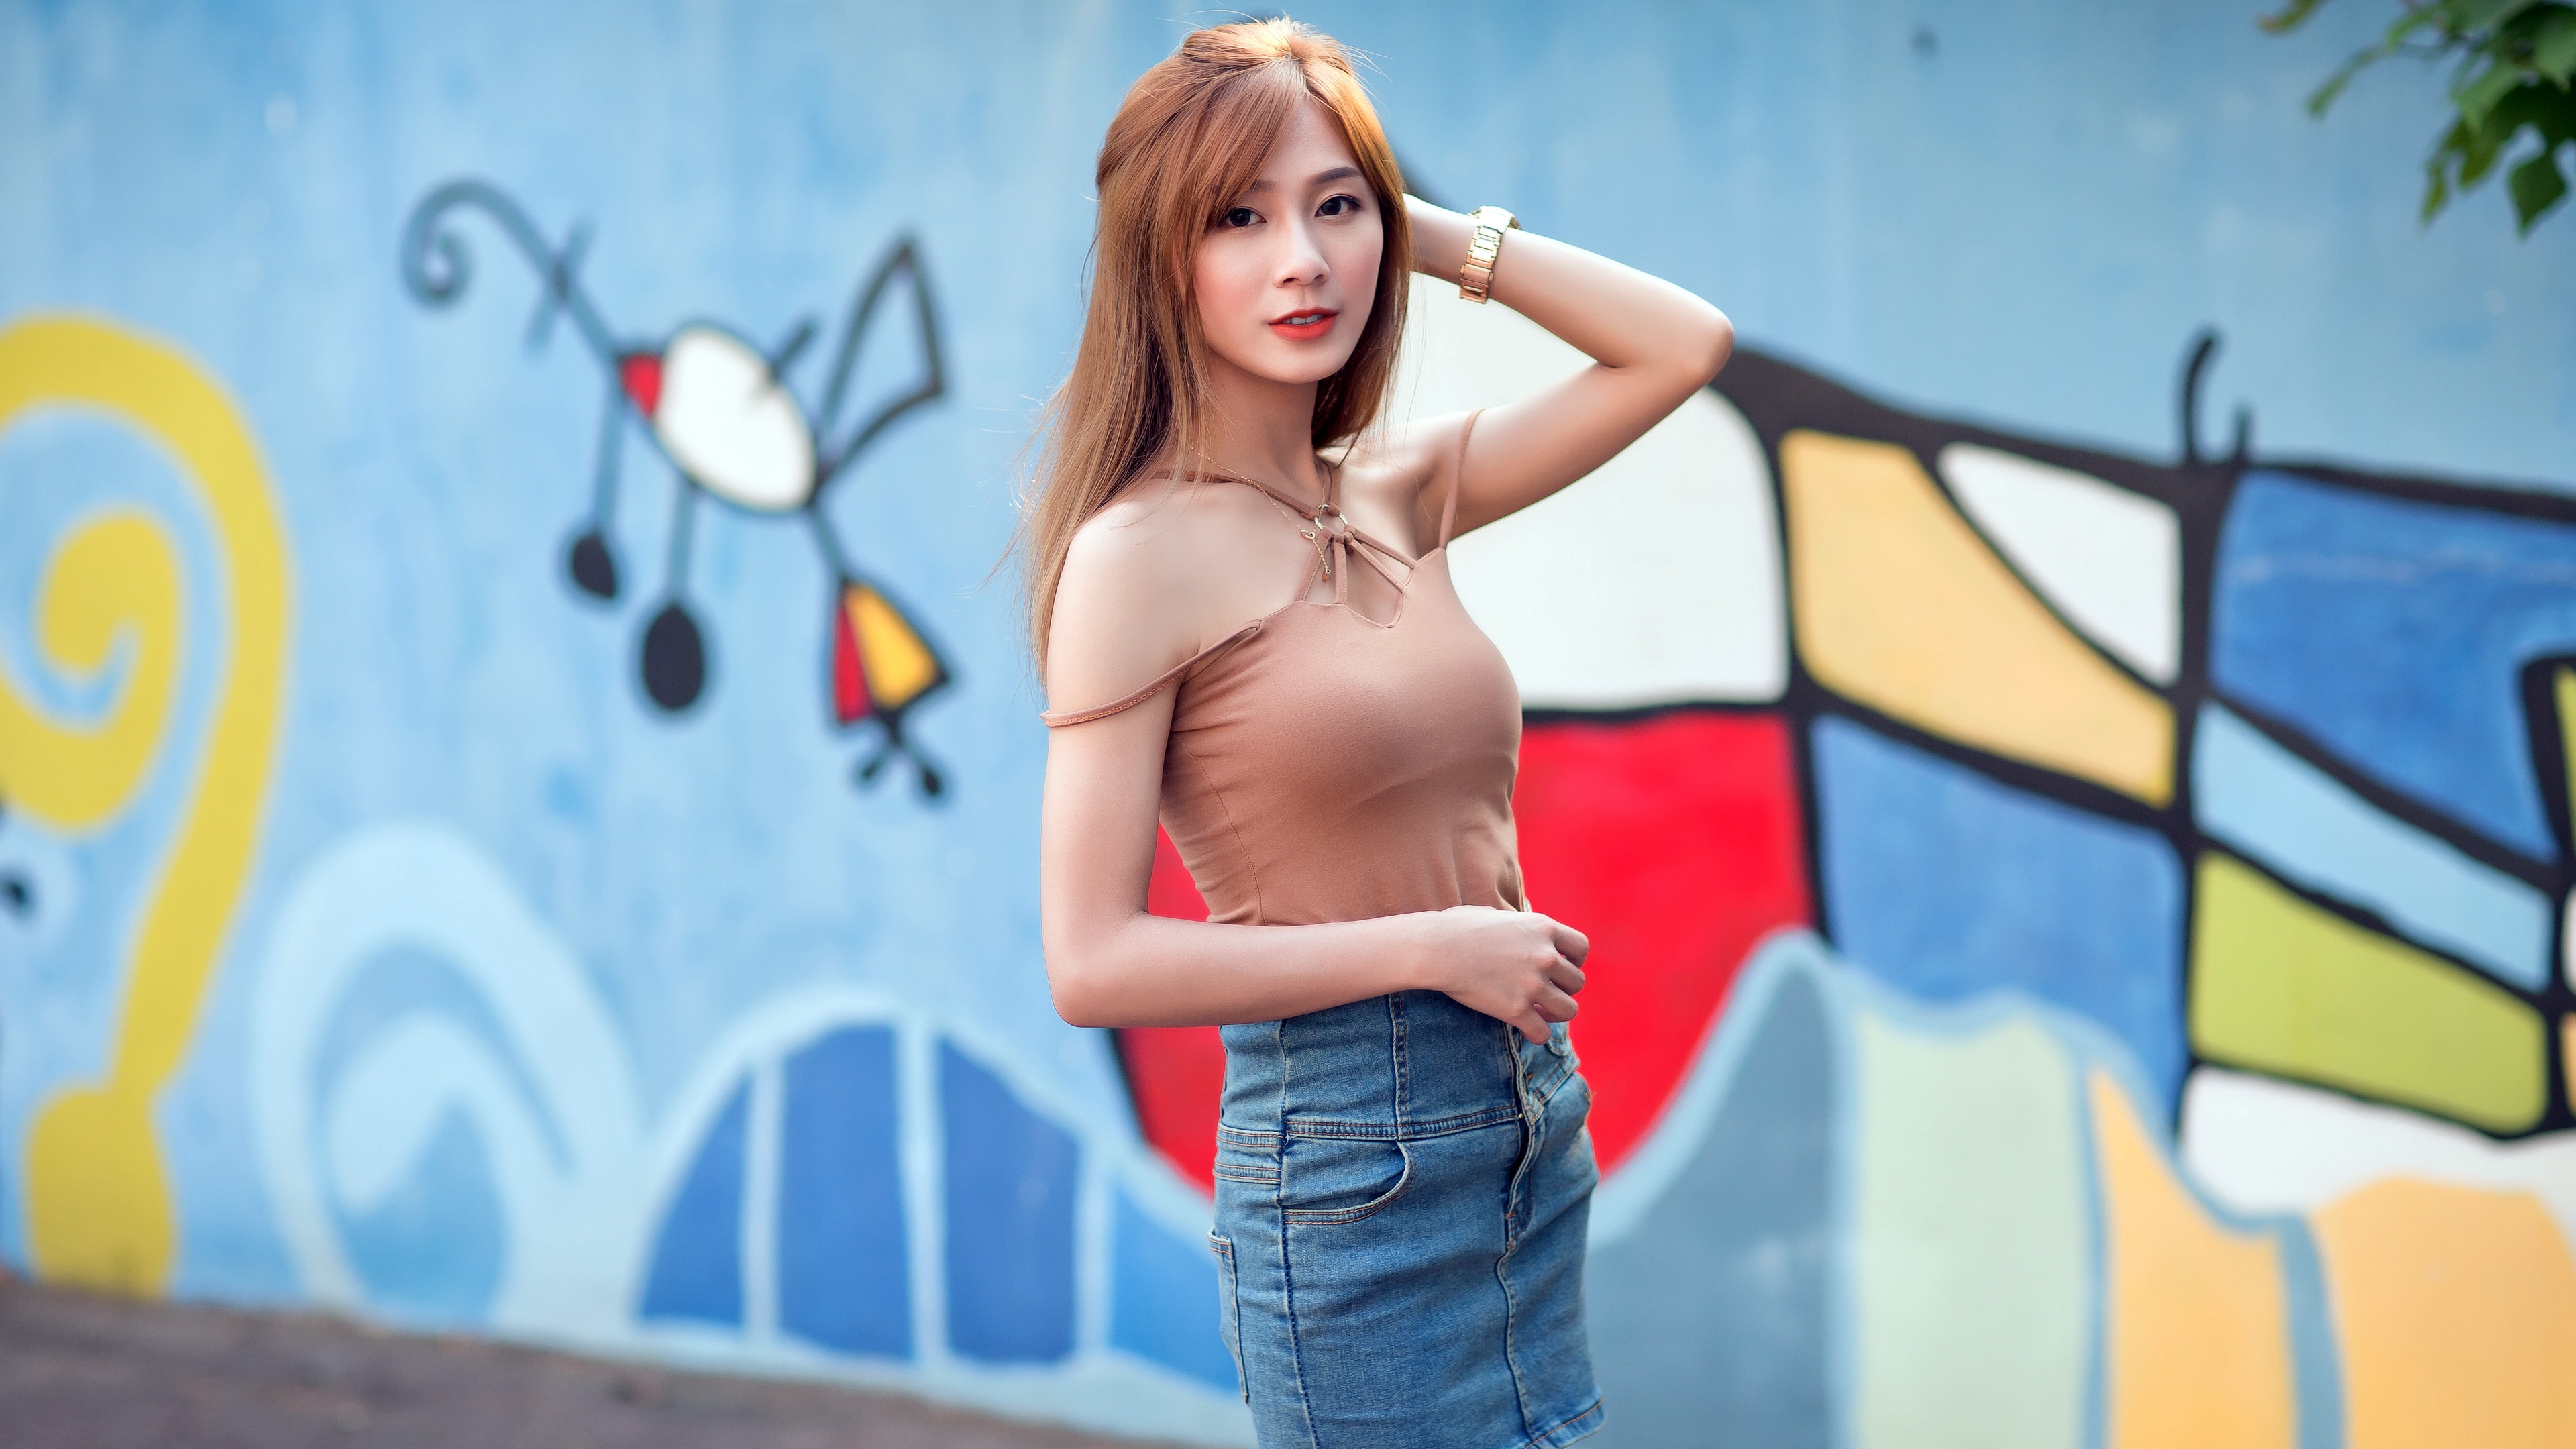 Asian Model Outdoors Women Outdoors Urban Wall Dyed Hair Standing Red Lipstick Looking At Viewer Str 3840x2160